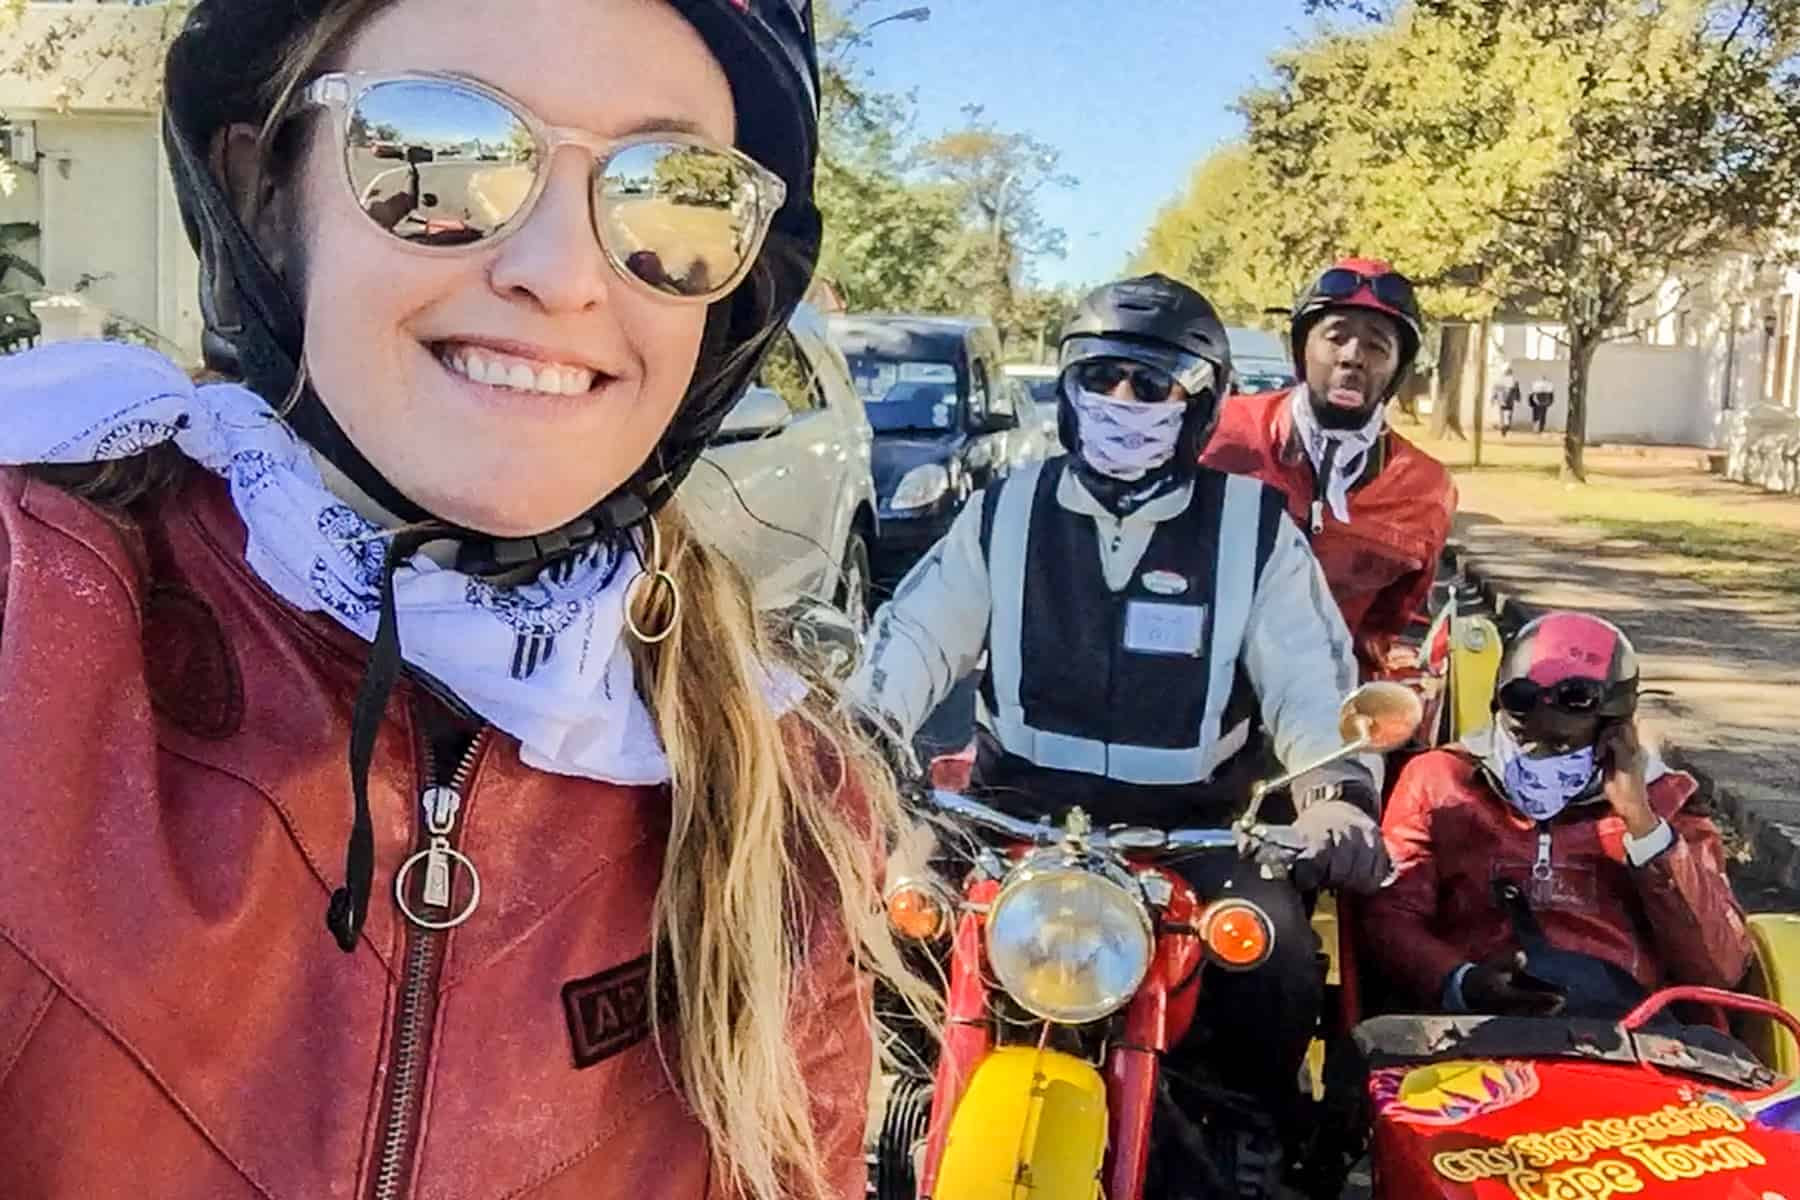 A woman wearing a red leather jacket takes a selfie. Behind her a group of other passengers, and a driver wearing white, look towards the camera from their red sidecars.